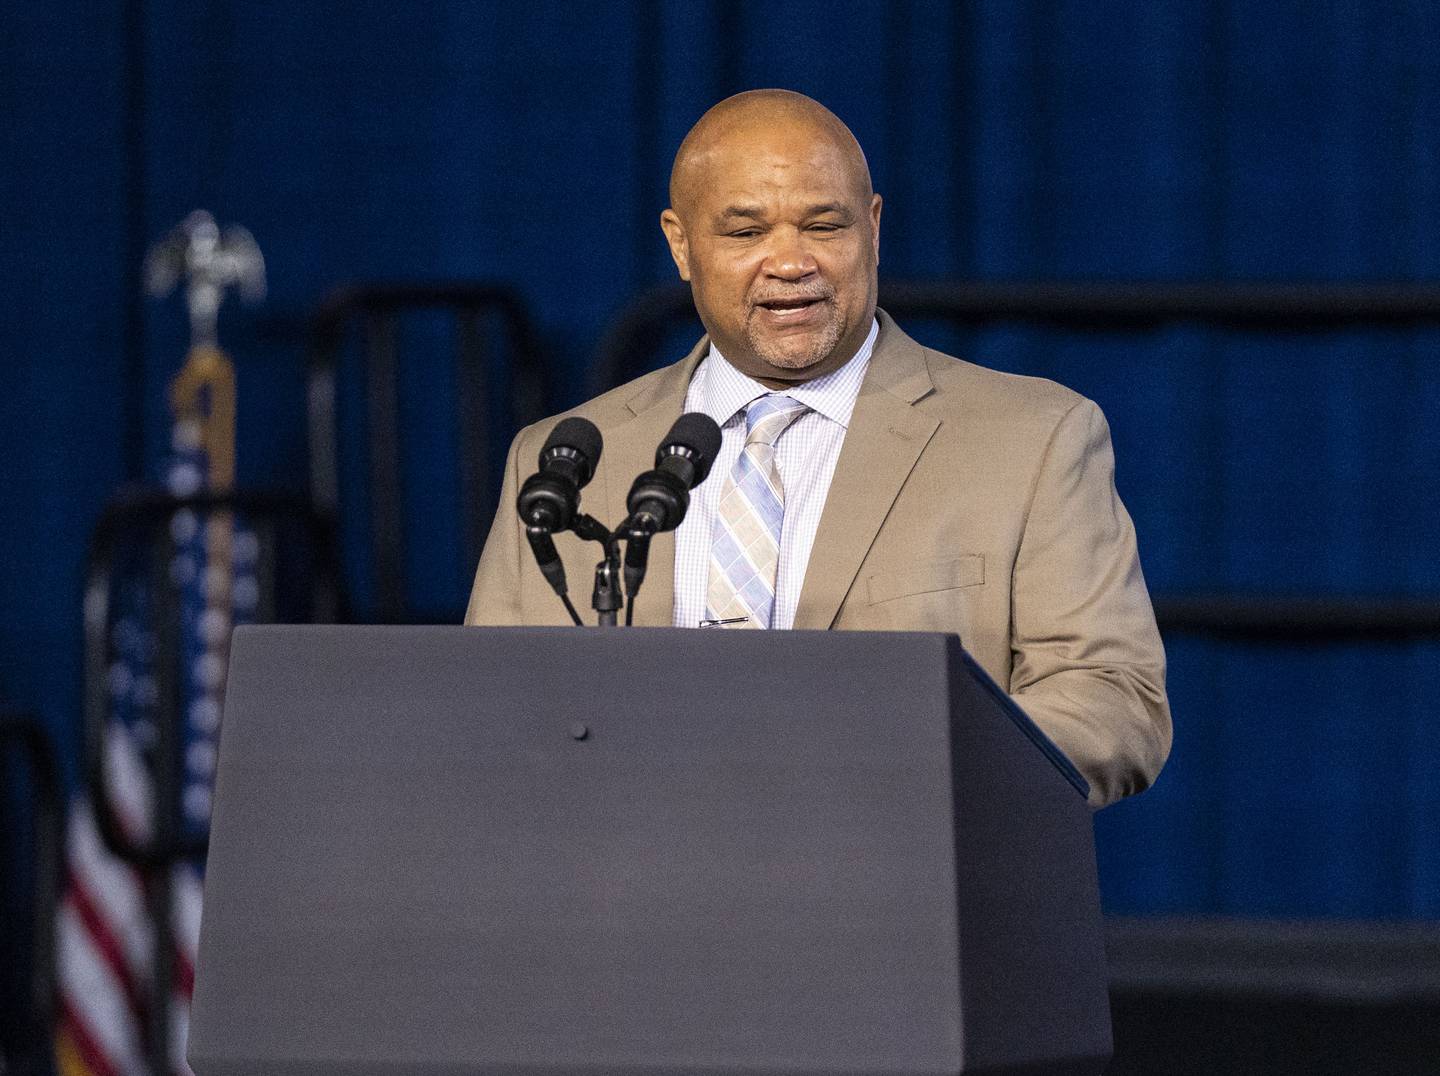 Dereck Davis, Maryland state treasurer, speaks at a campaign event in support of gubernatorial candidate Wes Moore at Bowie State University, in Bowie, MD. November 7, 2022.